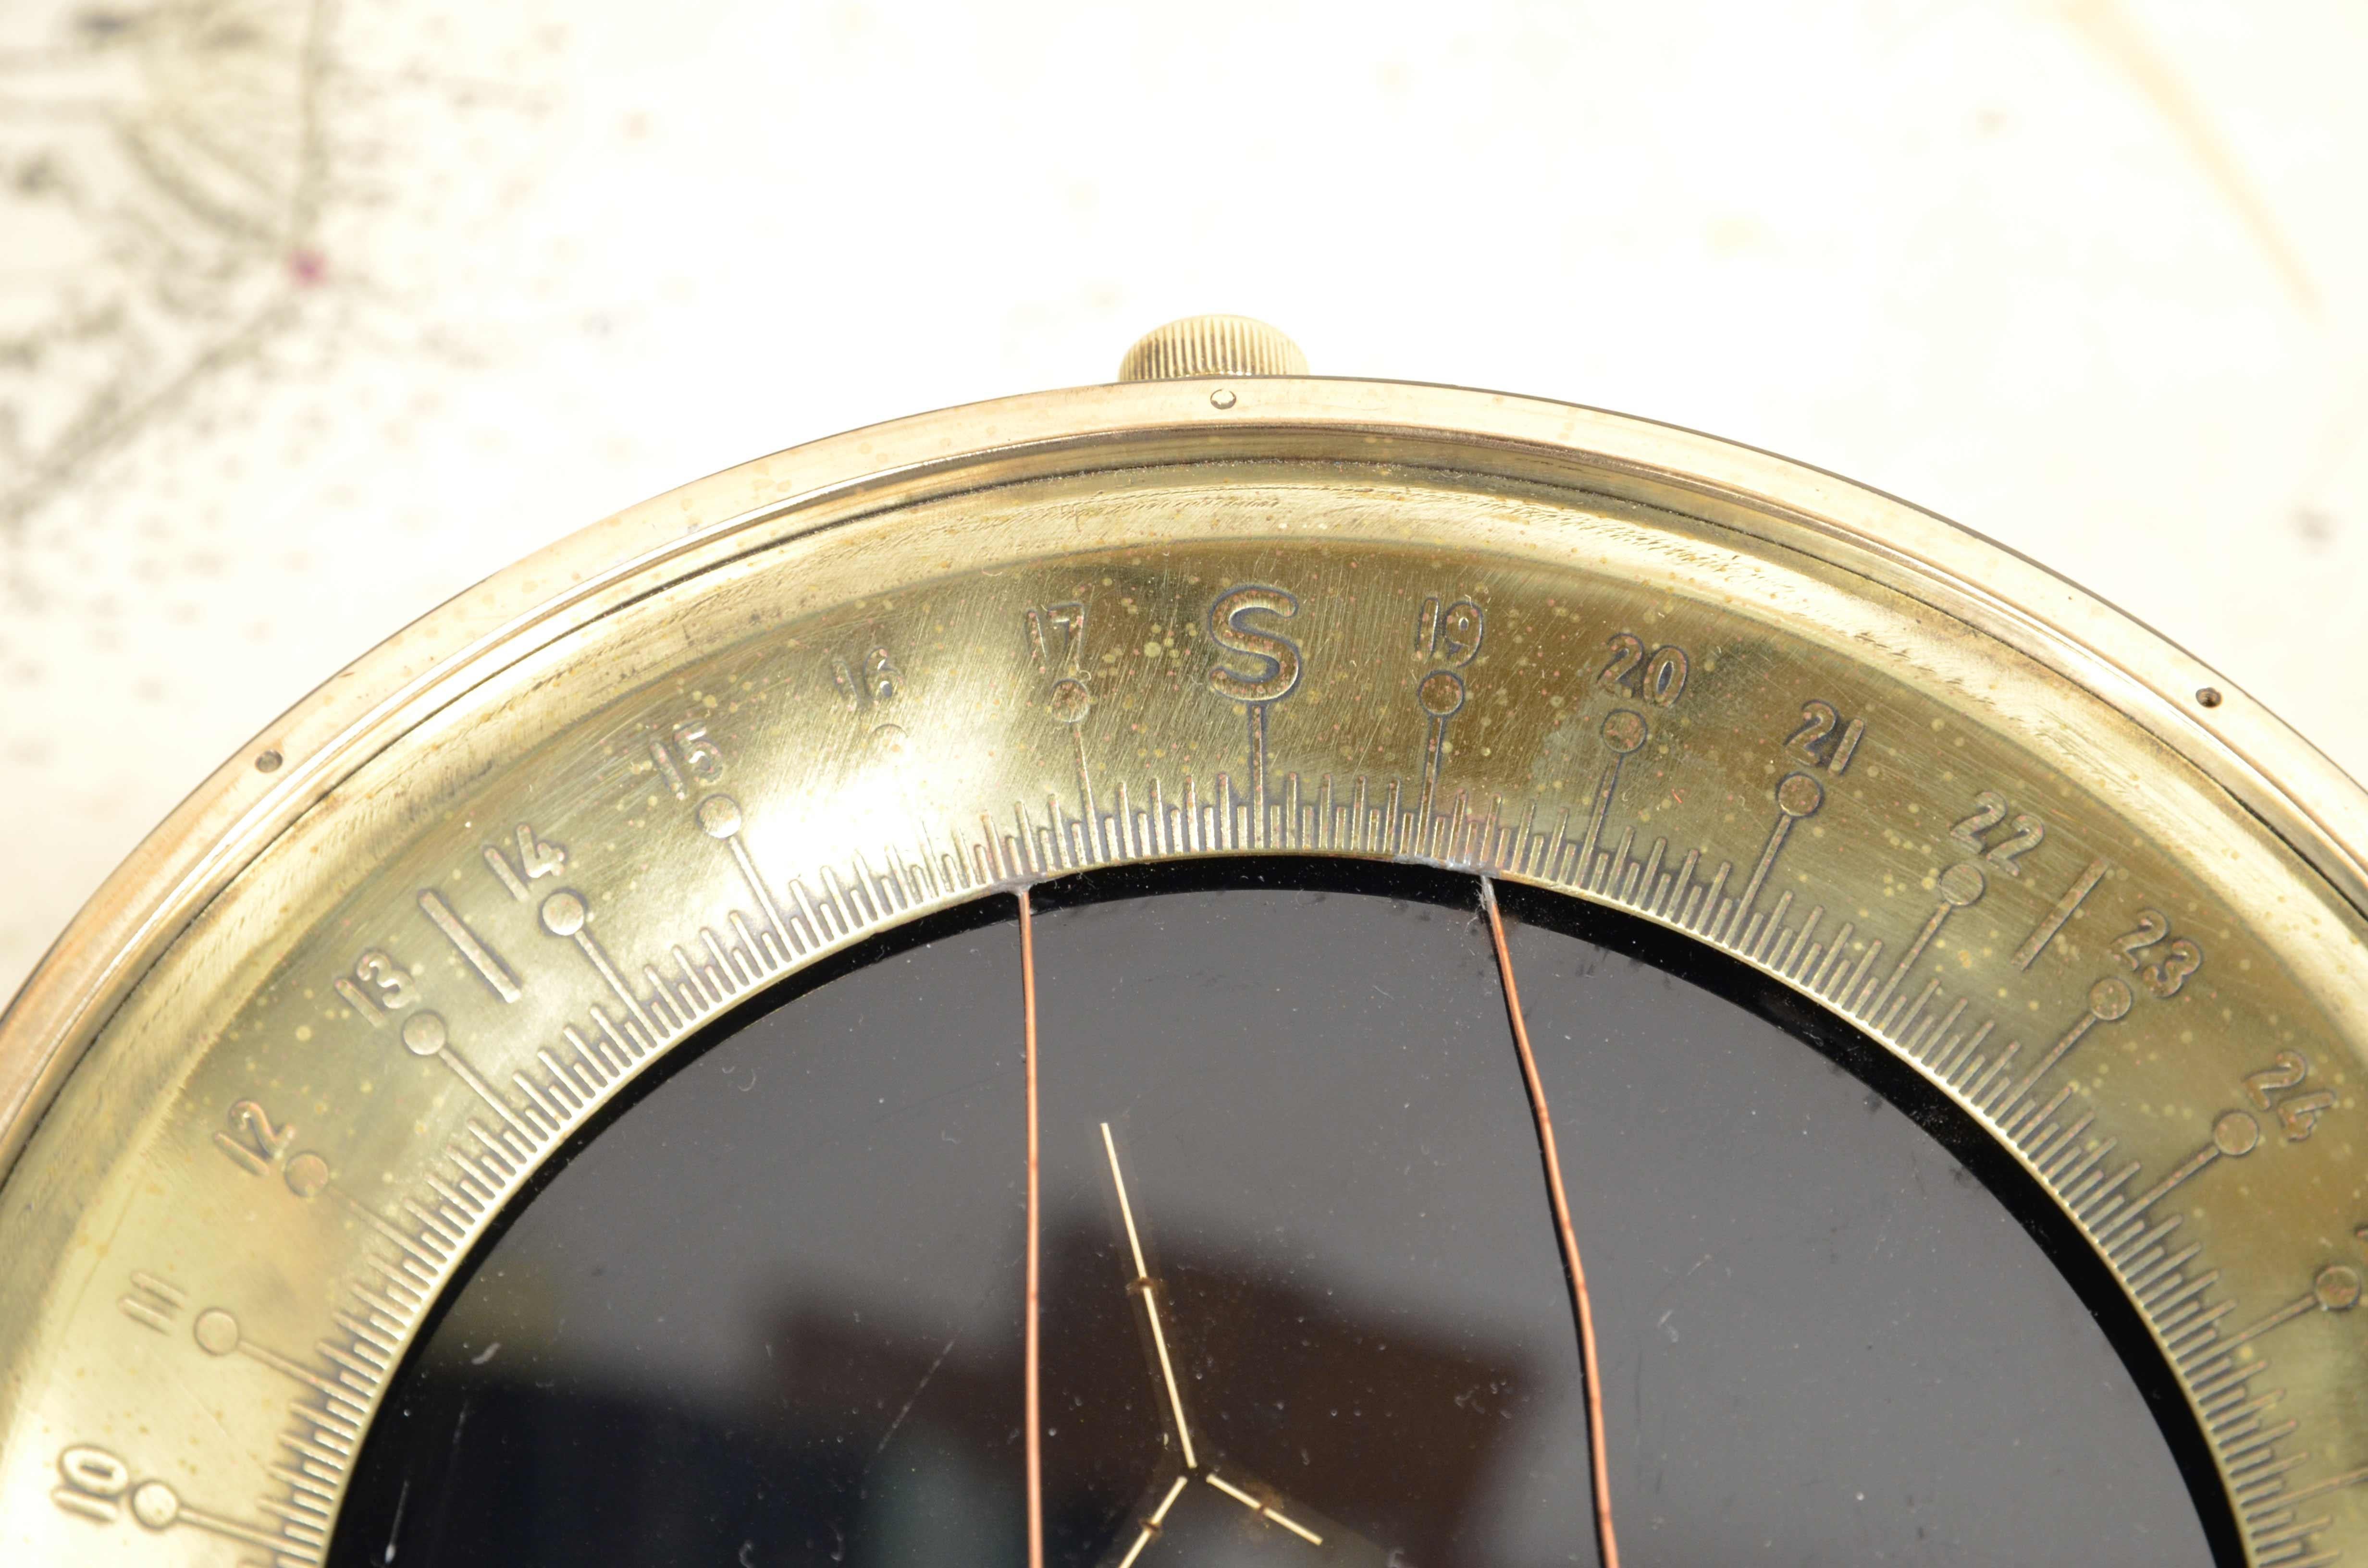 Aluminum Brass and aluminum aviation compass complete with azimuth circle 1940 U.S.A For Sale